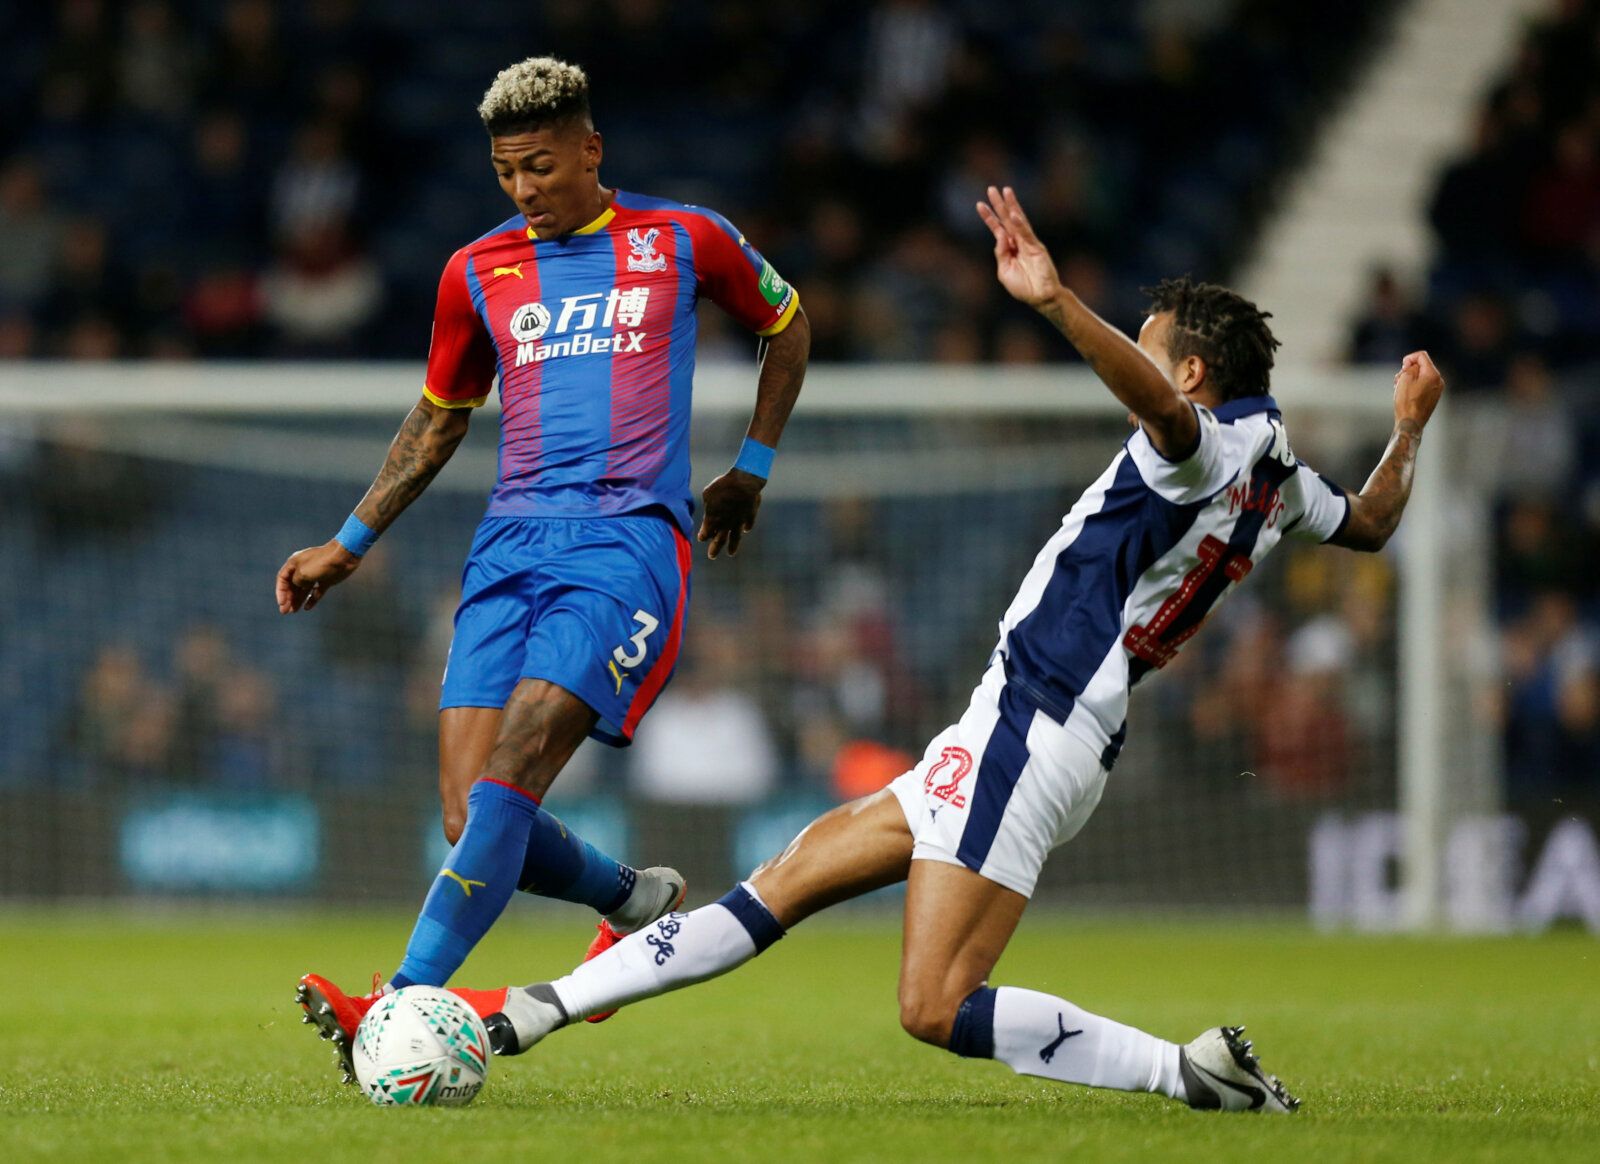 Soccer Football - Carabao Cup - Third Round - West Bromwich Albion v Crystal Palace - The Hawthorns, West Bromwich, Britain - September 25, 2018  Crystal Palace's Patrick van Aanholt in action with West Brom's Tyrone Mears  Action Images via Reuters/Ed Sykes  EDITORIAL USE ONLY. No use with unauthorized audio, video, data, fixture lists, club/league logos or 